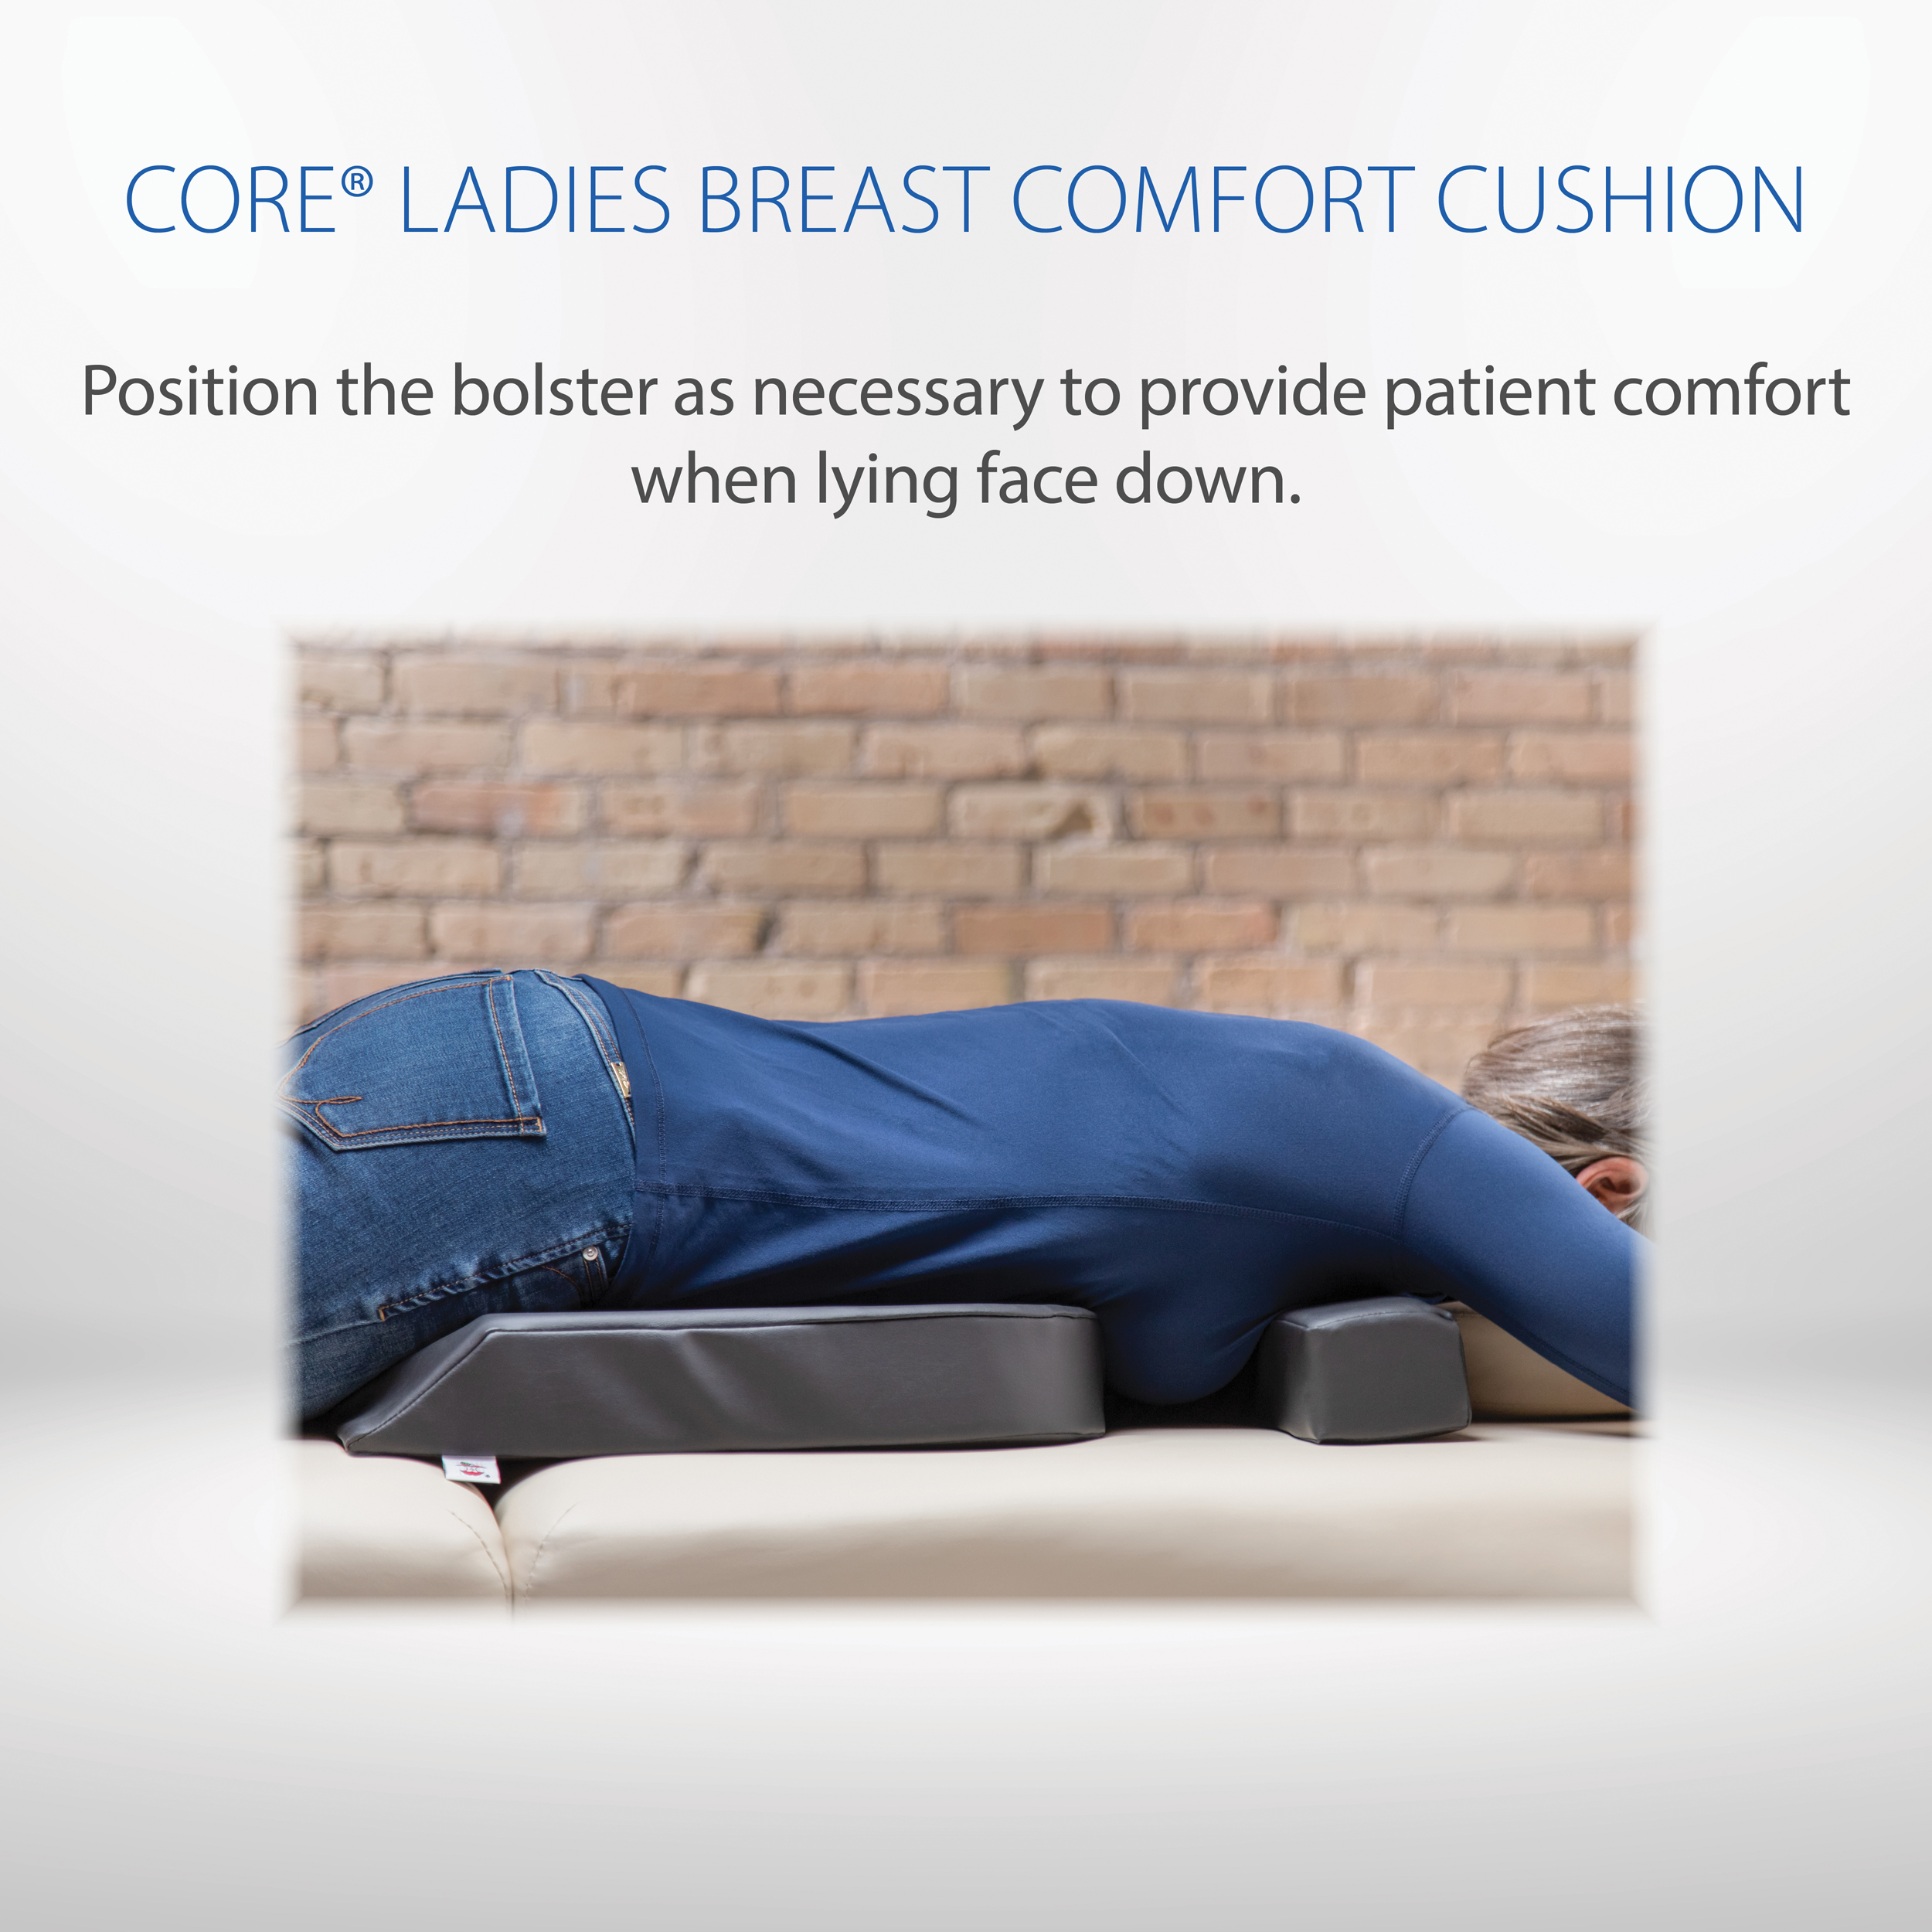 Core Products Breast Comfort Cushion for Face-Down Positioning